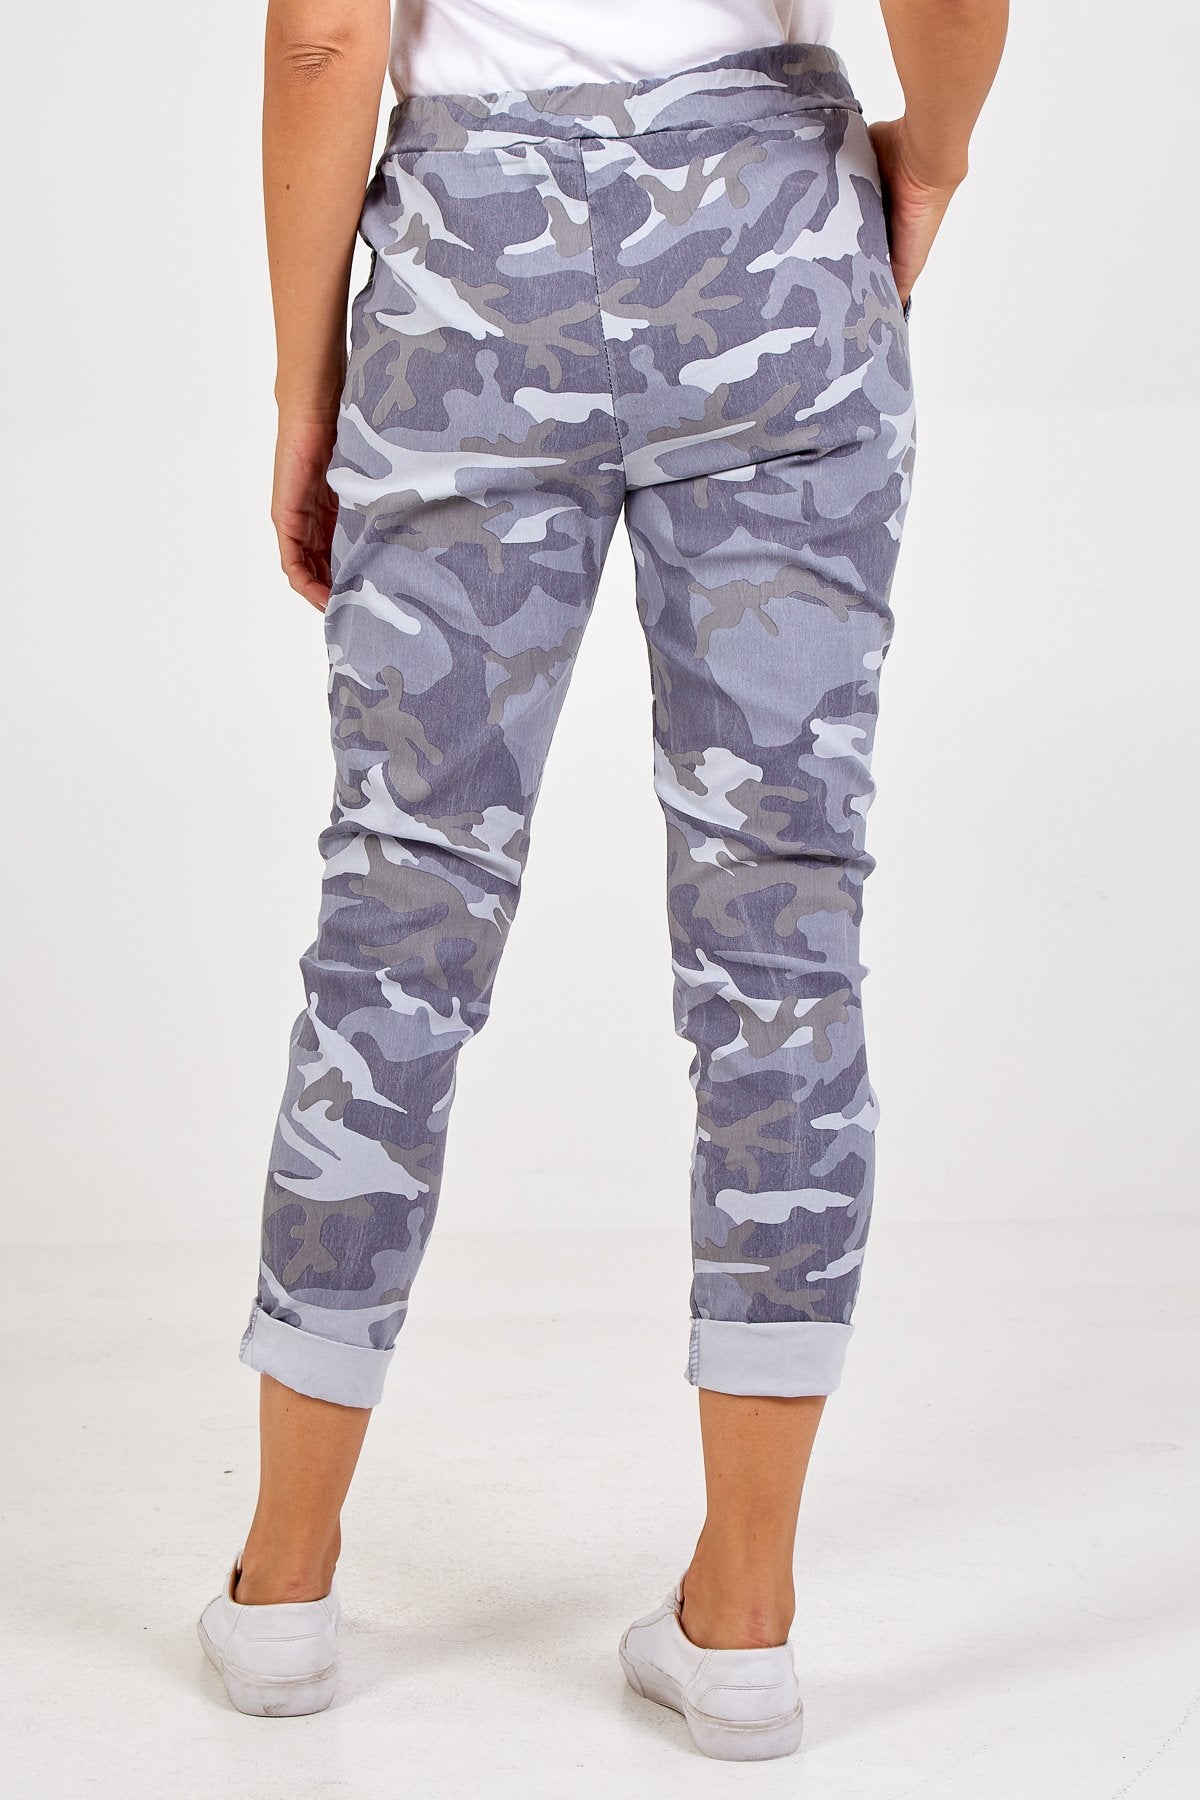 Gill Plus Sized Magic Camouflage Trousers - Grey - Liven Boutique